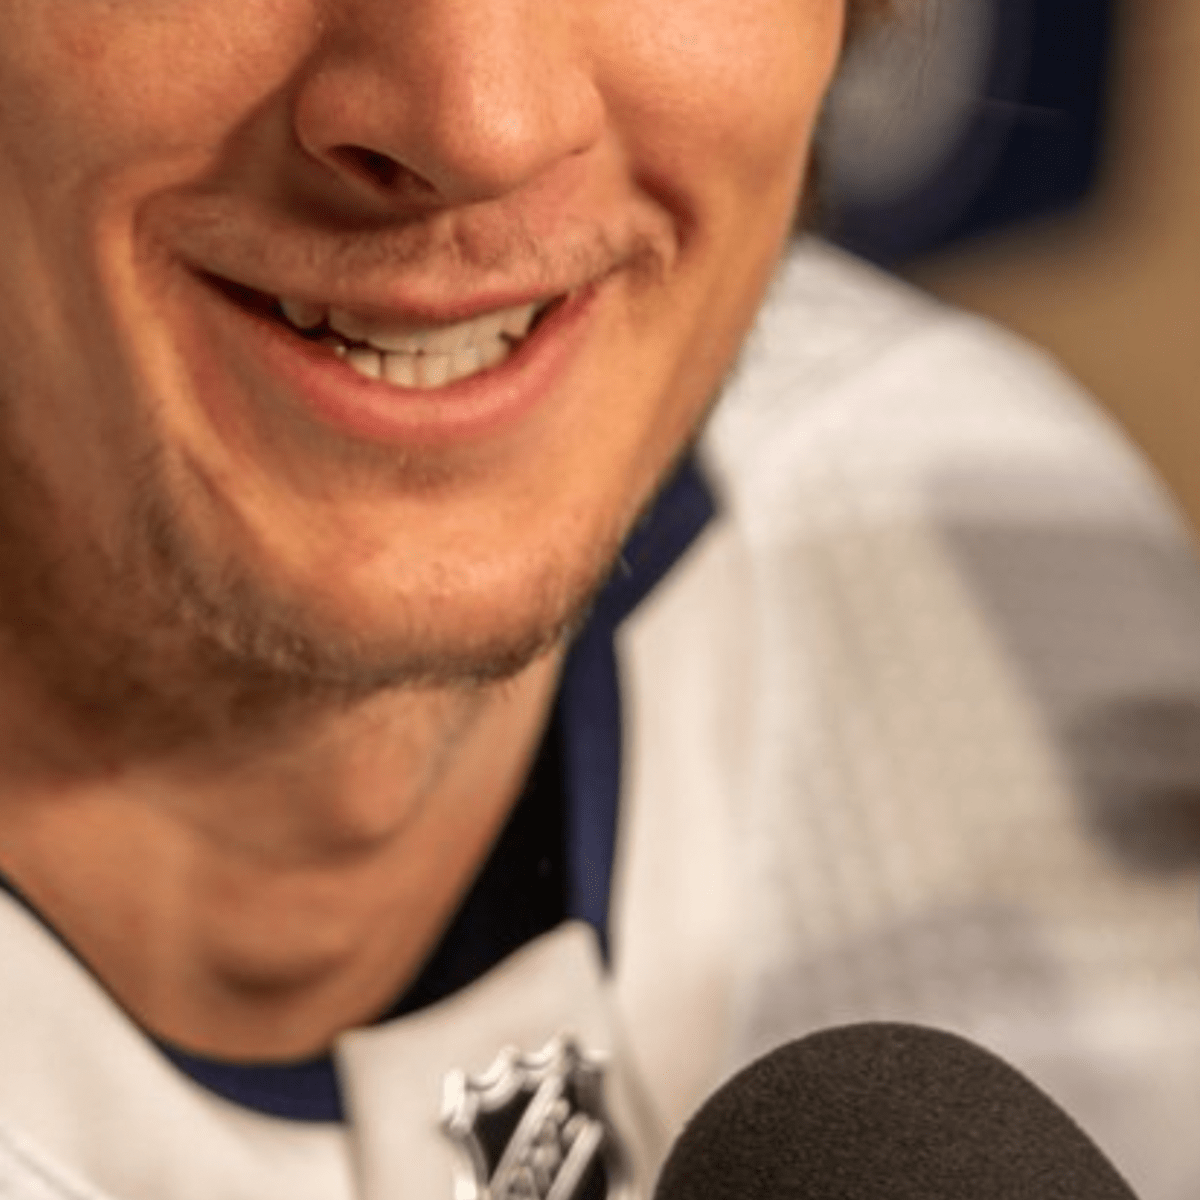 NHL Player Returns To Playoff Game After 75+ Stitches In Face